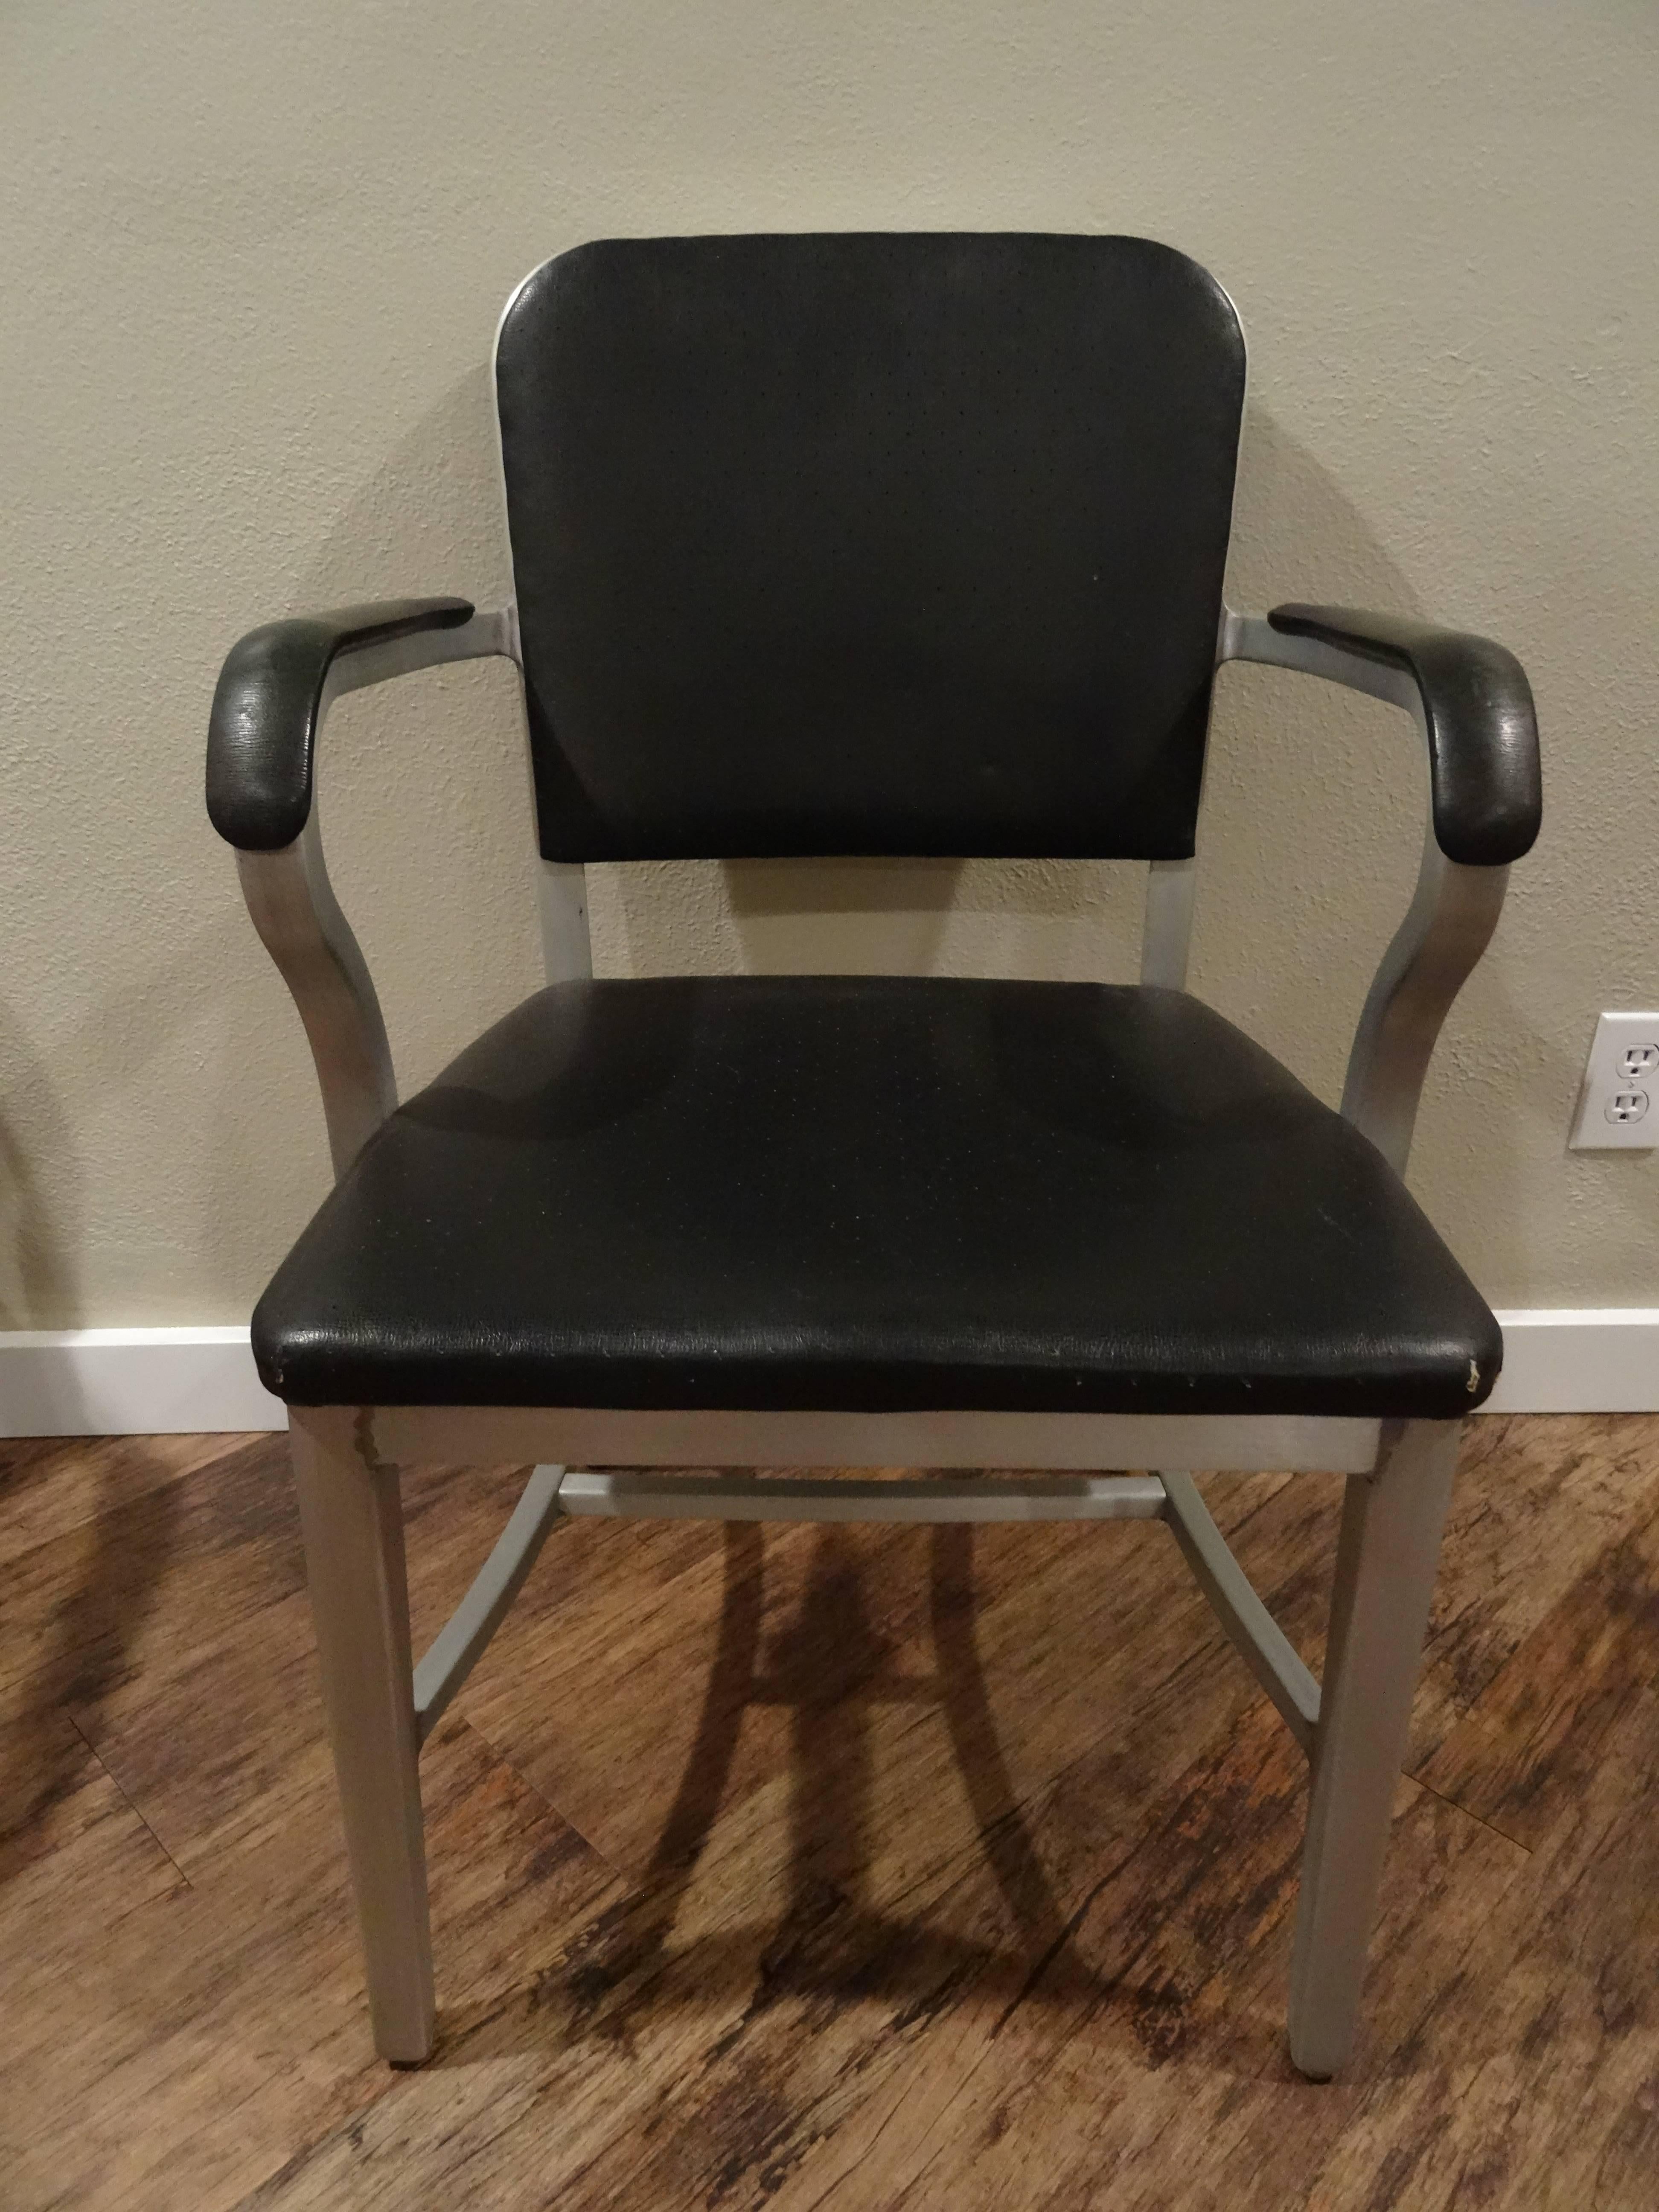 Mid century modern pair of Good Form Chairs, tagged general fireproofing company Aug. 1951.  Original paint has been stripped to show aluminum frames.  Original upholstery with minor wear reapplied to show it's life history.